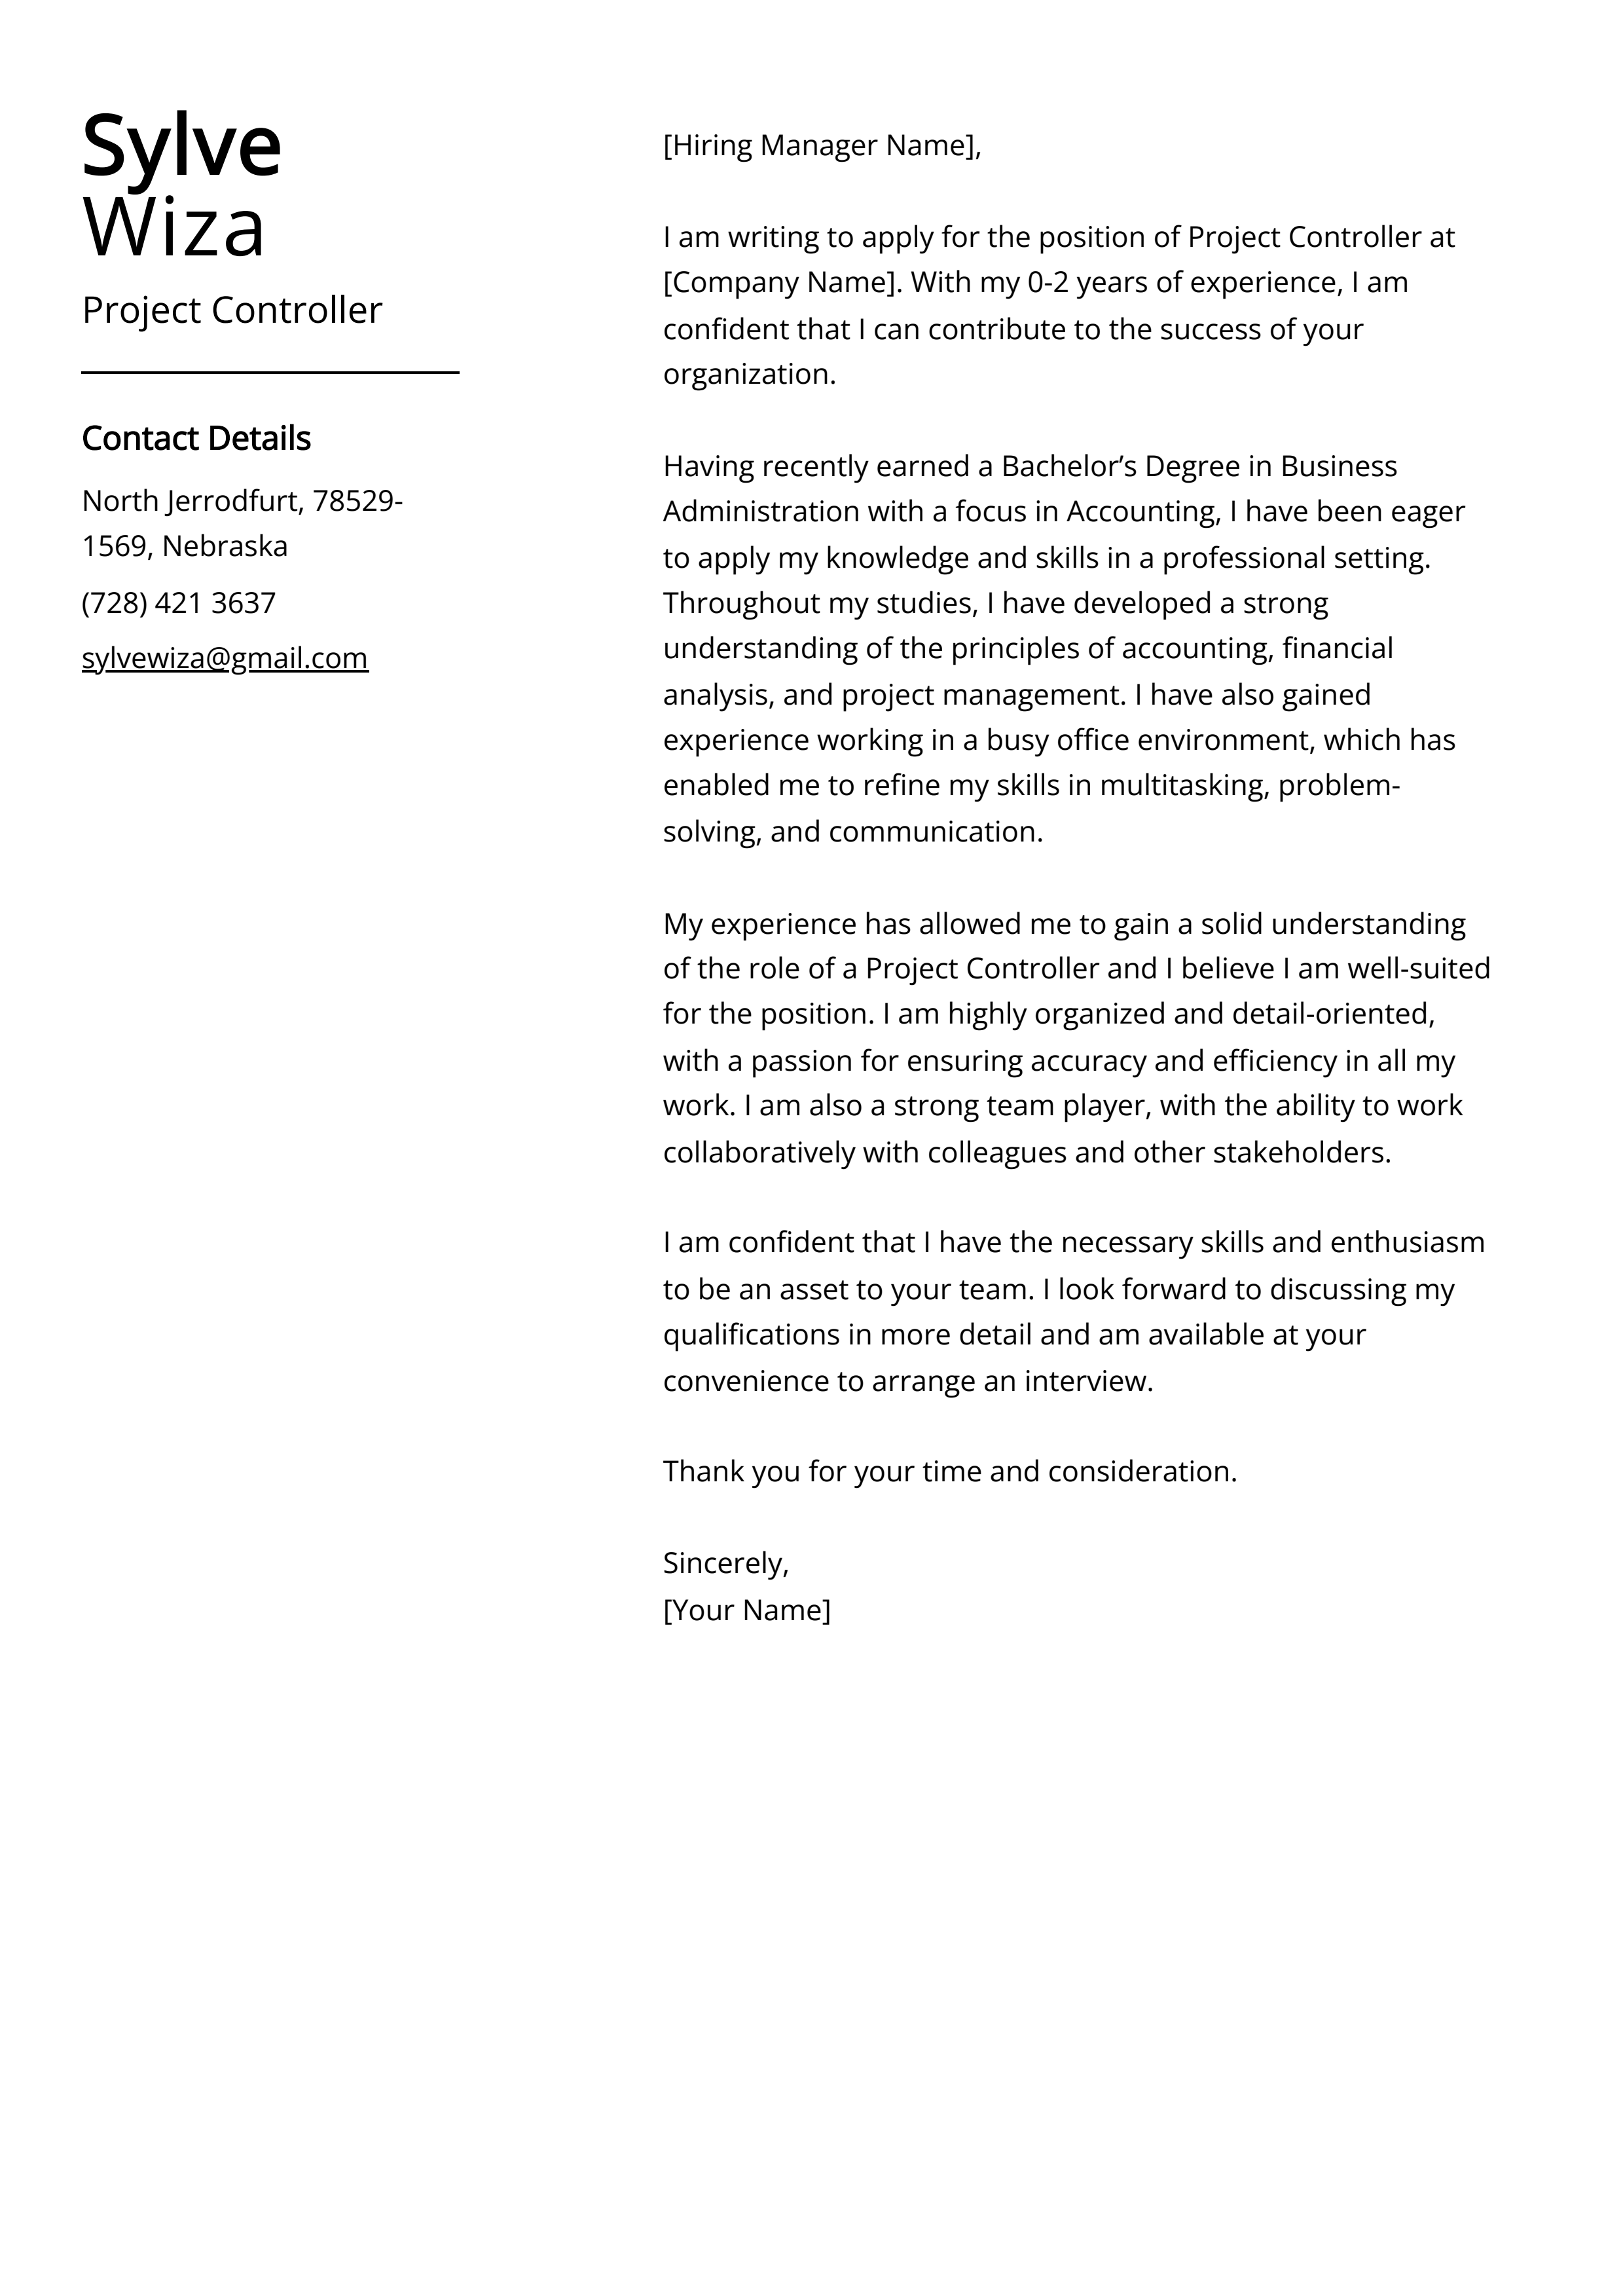 Project Controller Cover Letter Example